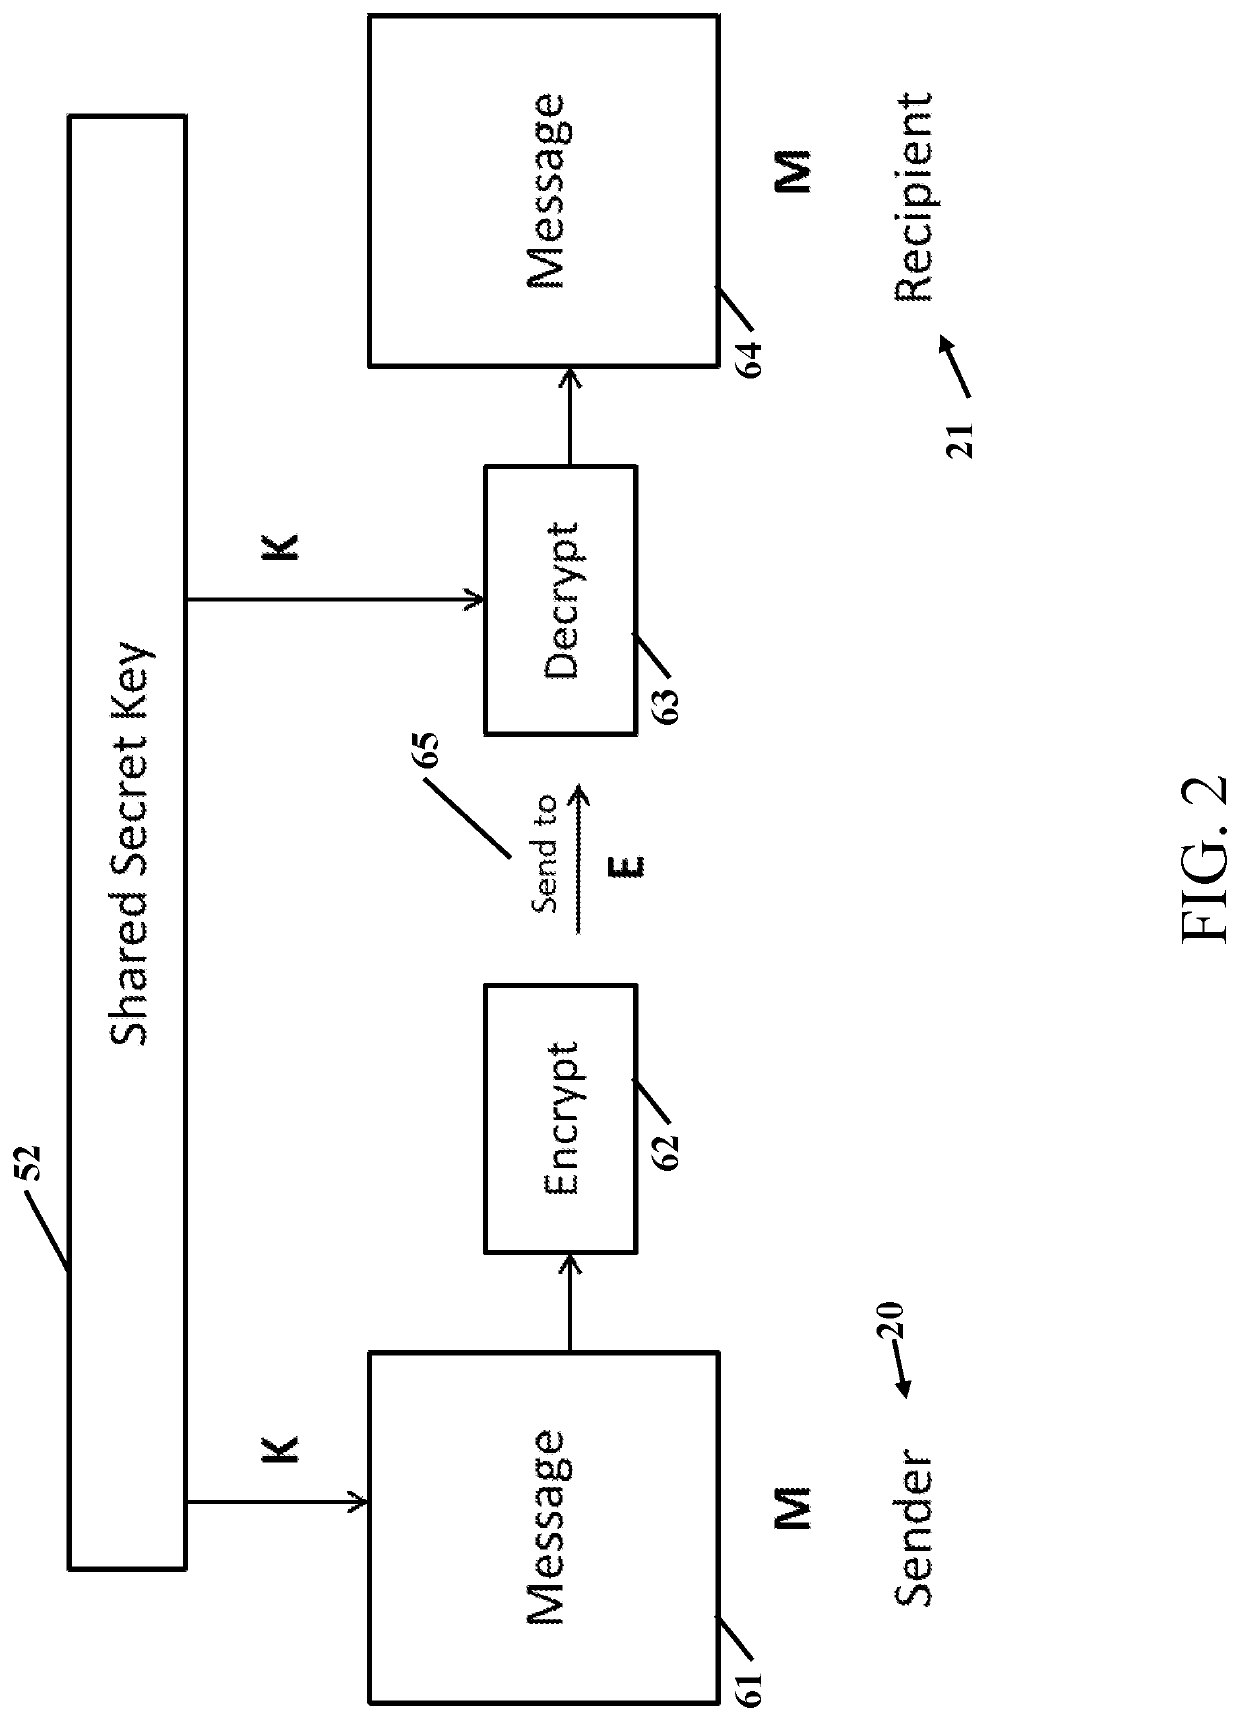 Quantum safe cryptography and advanced encryption and key exchange (AEKE) method for symmetric key encryption/exchange